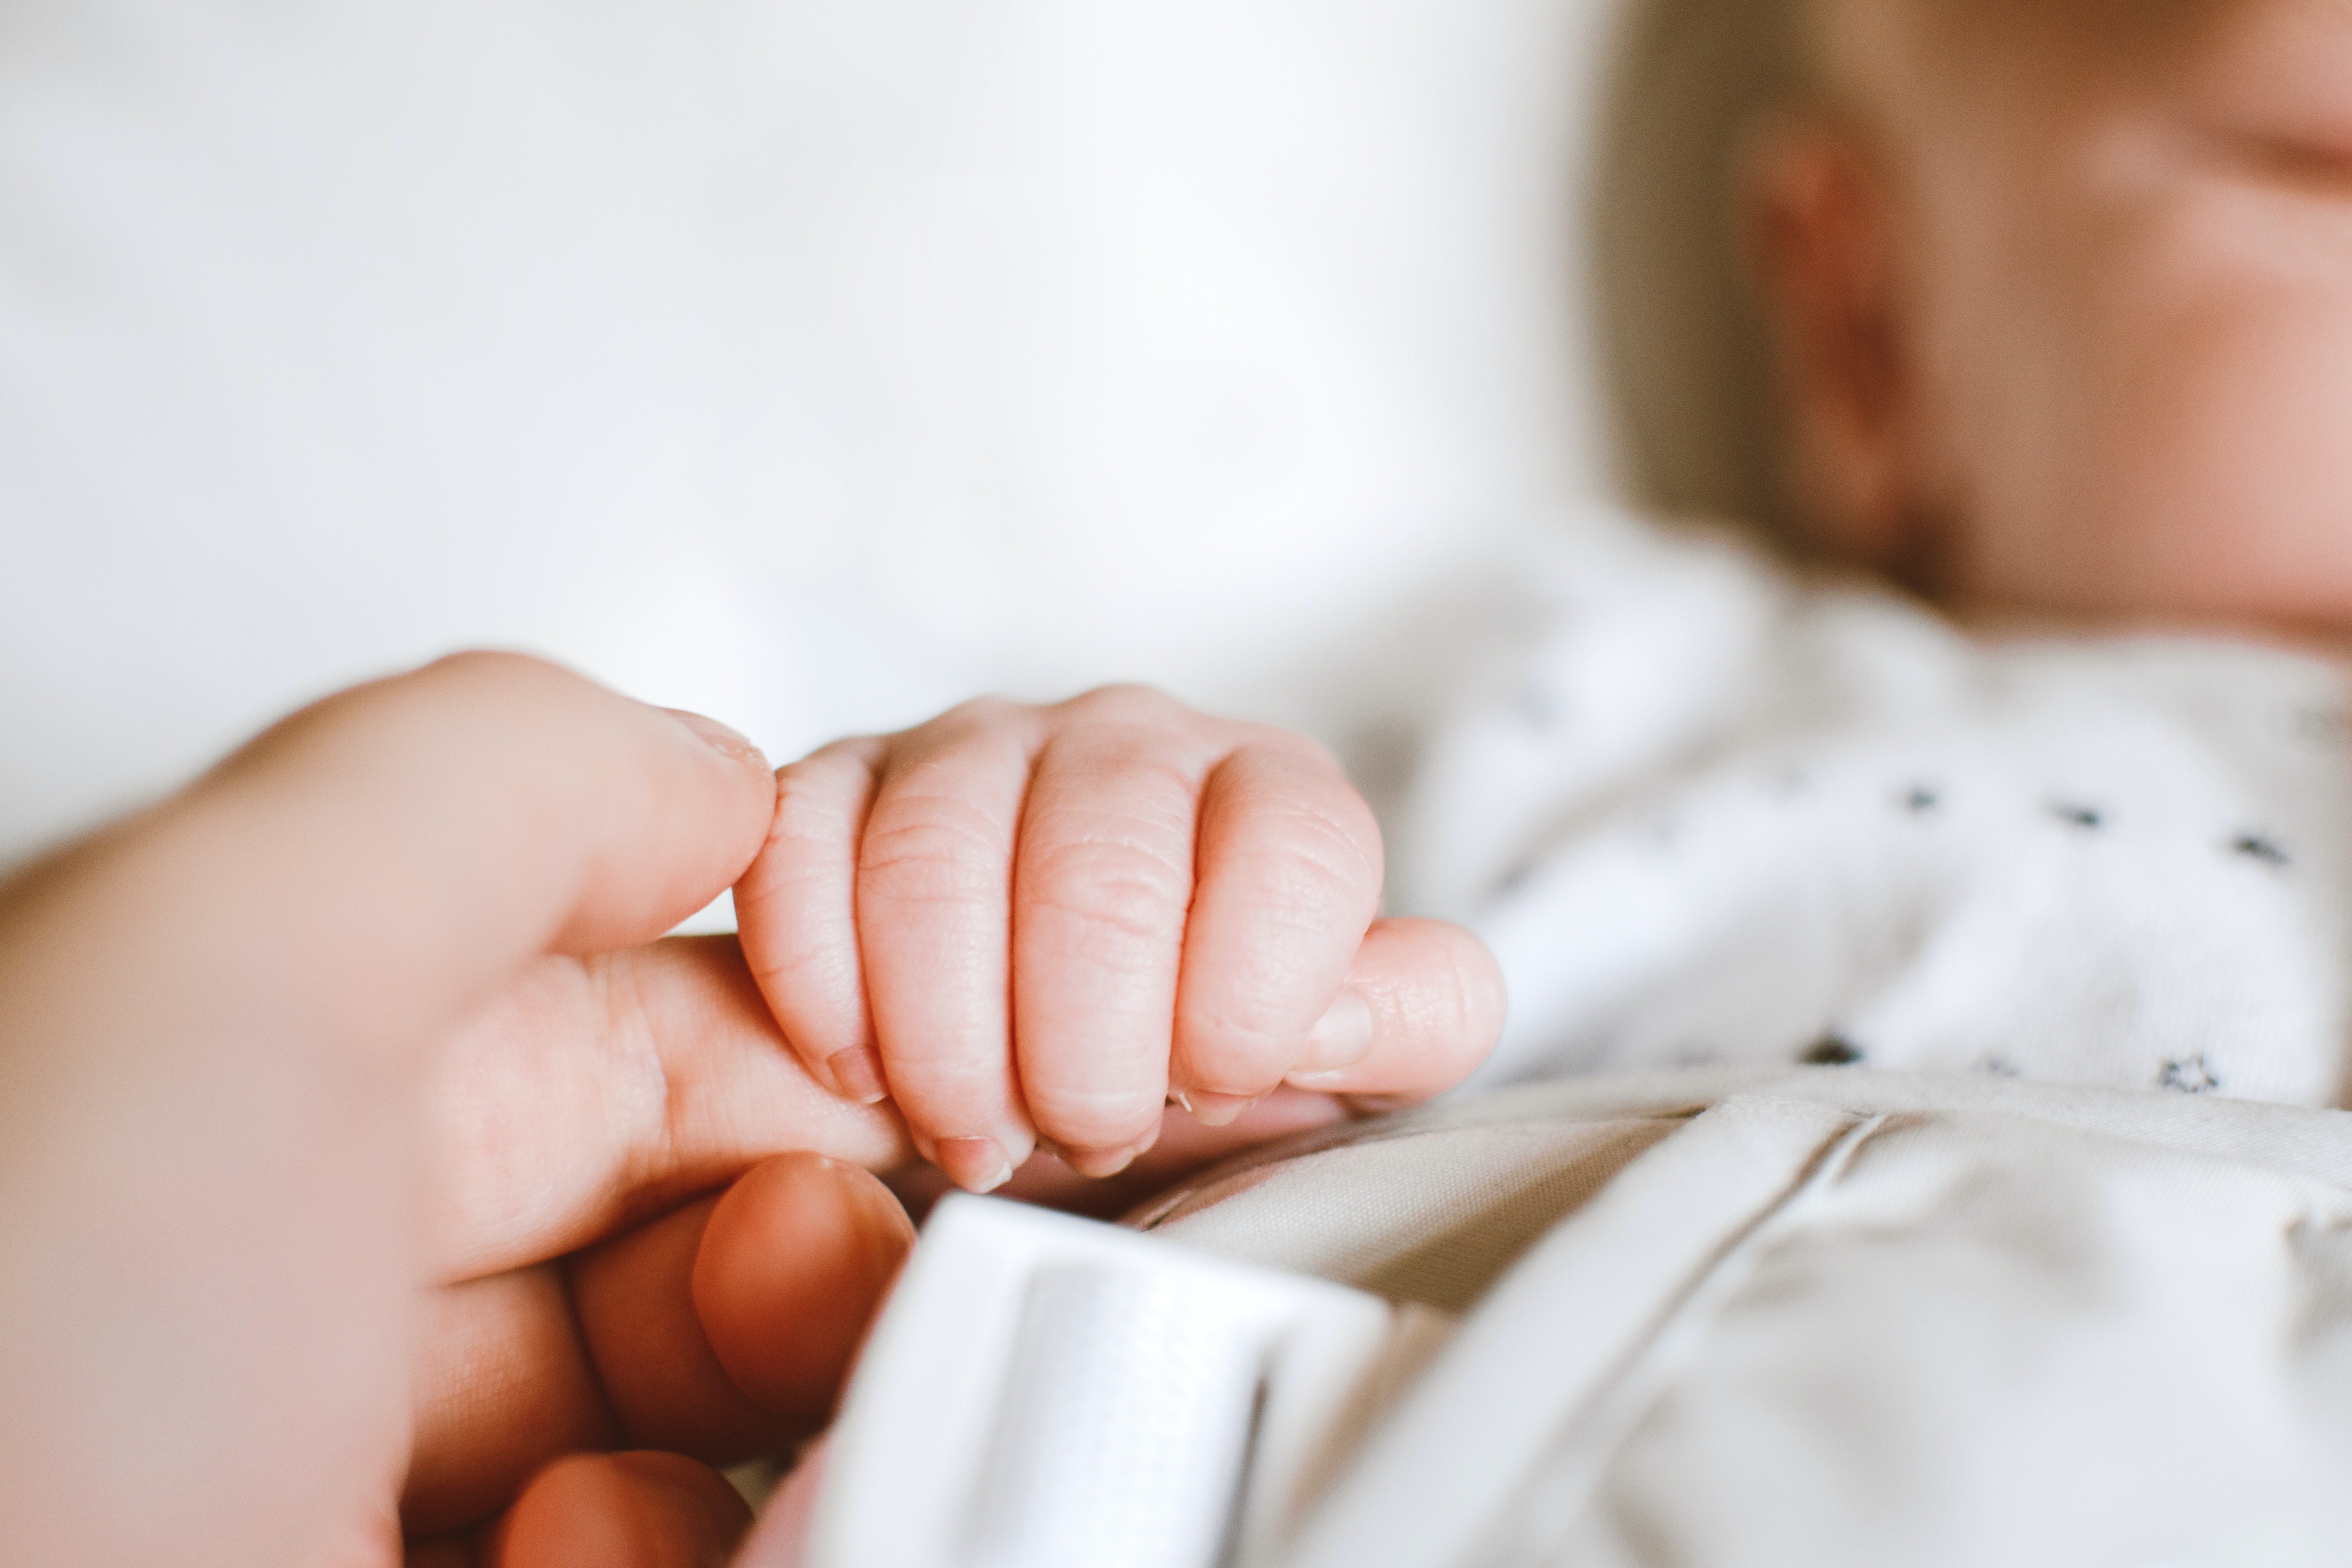 A baby's hand clutching a woman's finger | Source: Pexels